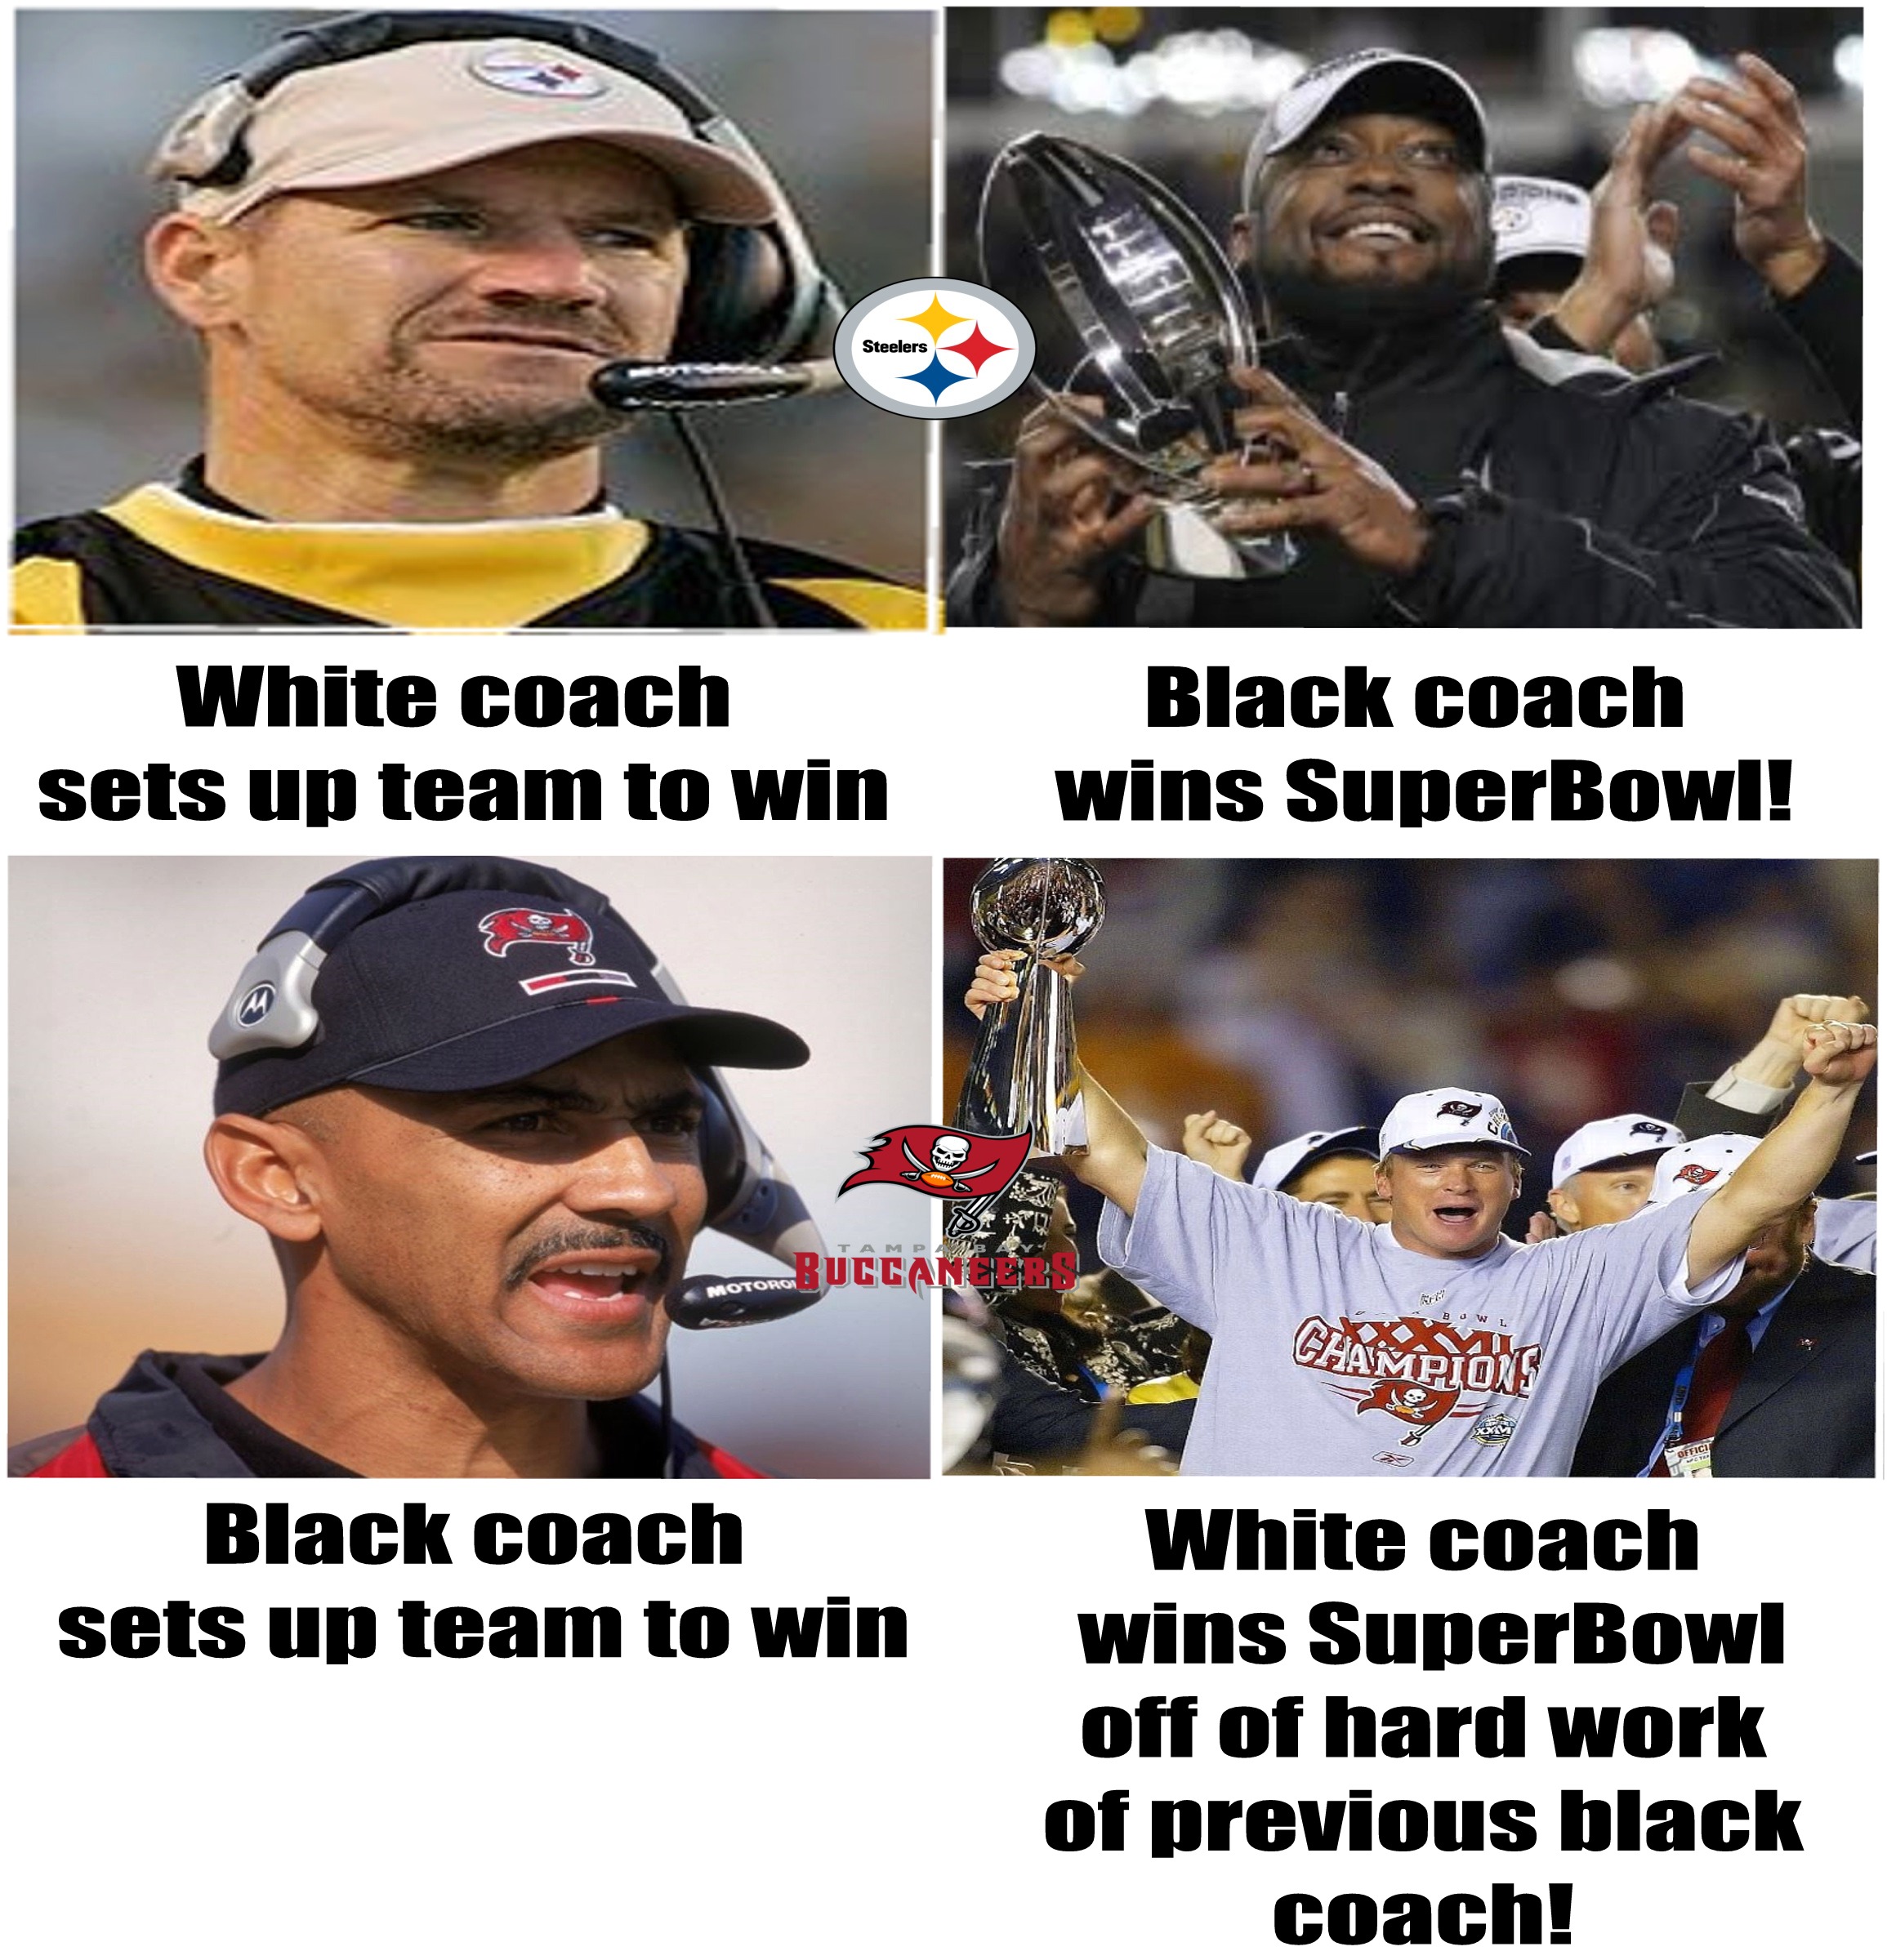 memes - team sport - White coach sets up team to win Black coach wins SuperBowl! Black coach sets up team to win White coach wins SuperBowl off of hard work of previous black coach!